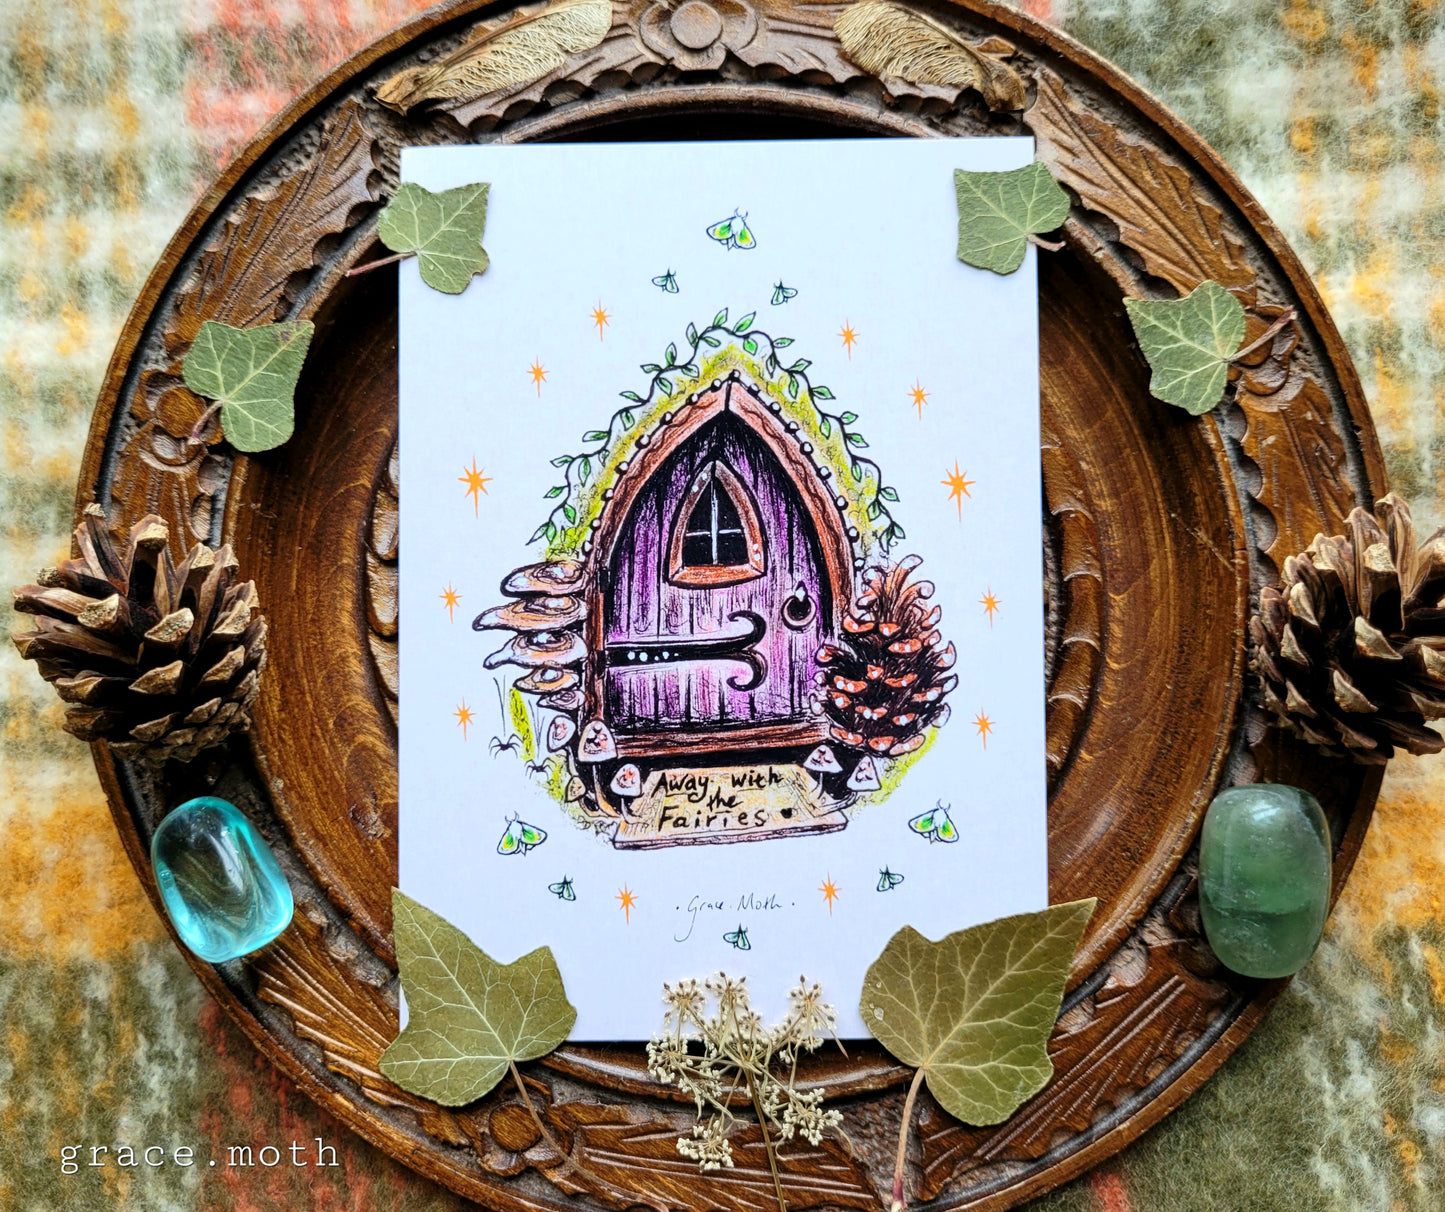 Fairy Door - A6 print by Grace Moth - 5.8 x 4.1 - Cottagecore - Gothic - Witchy